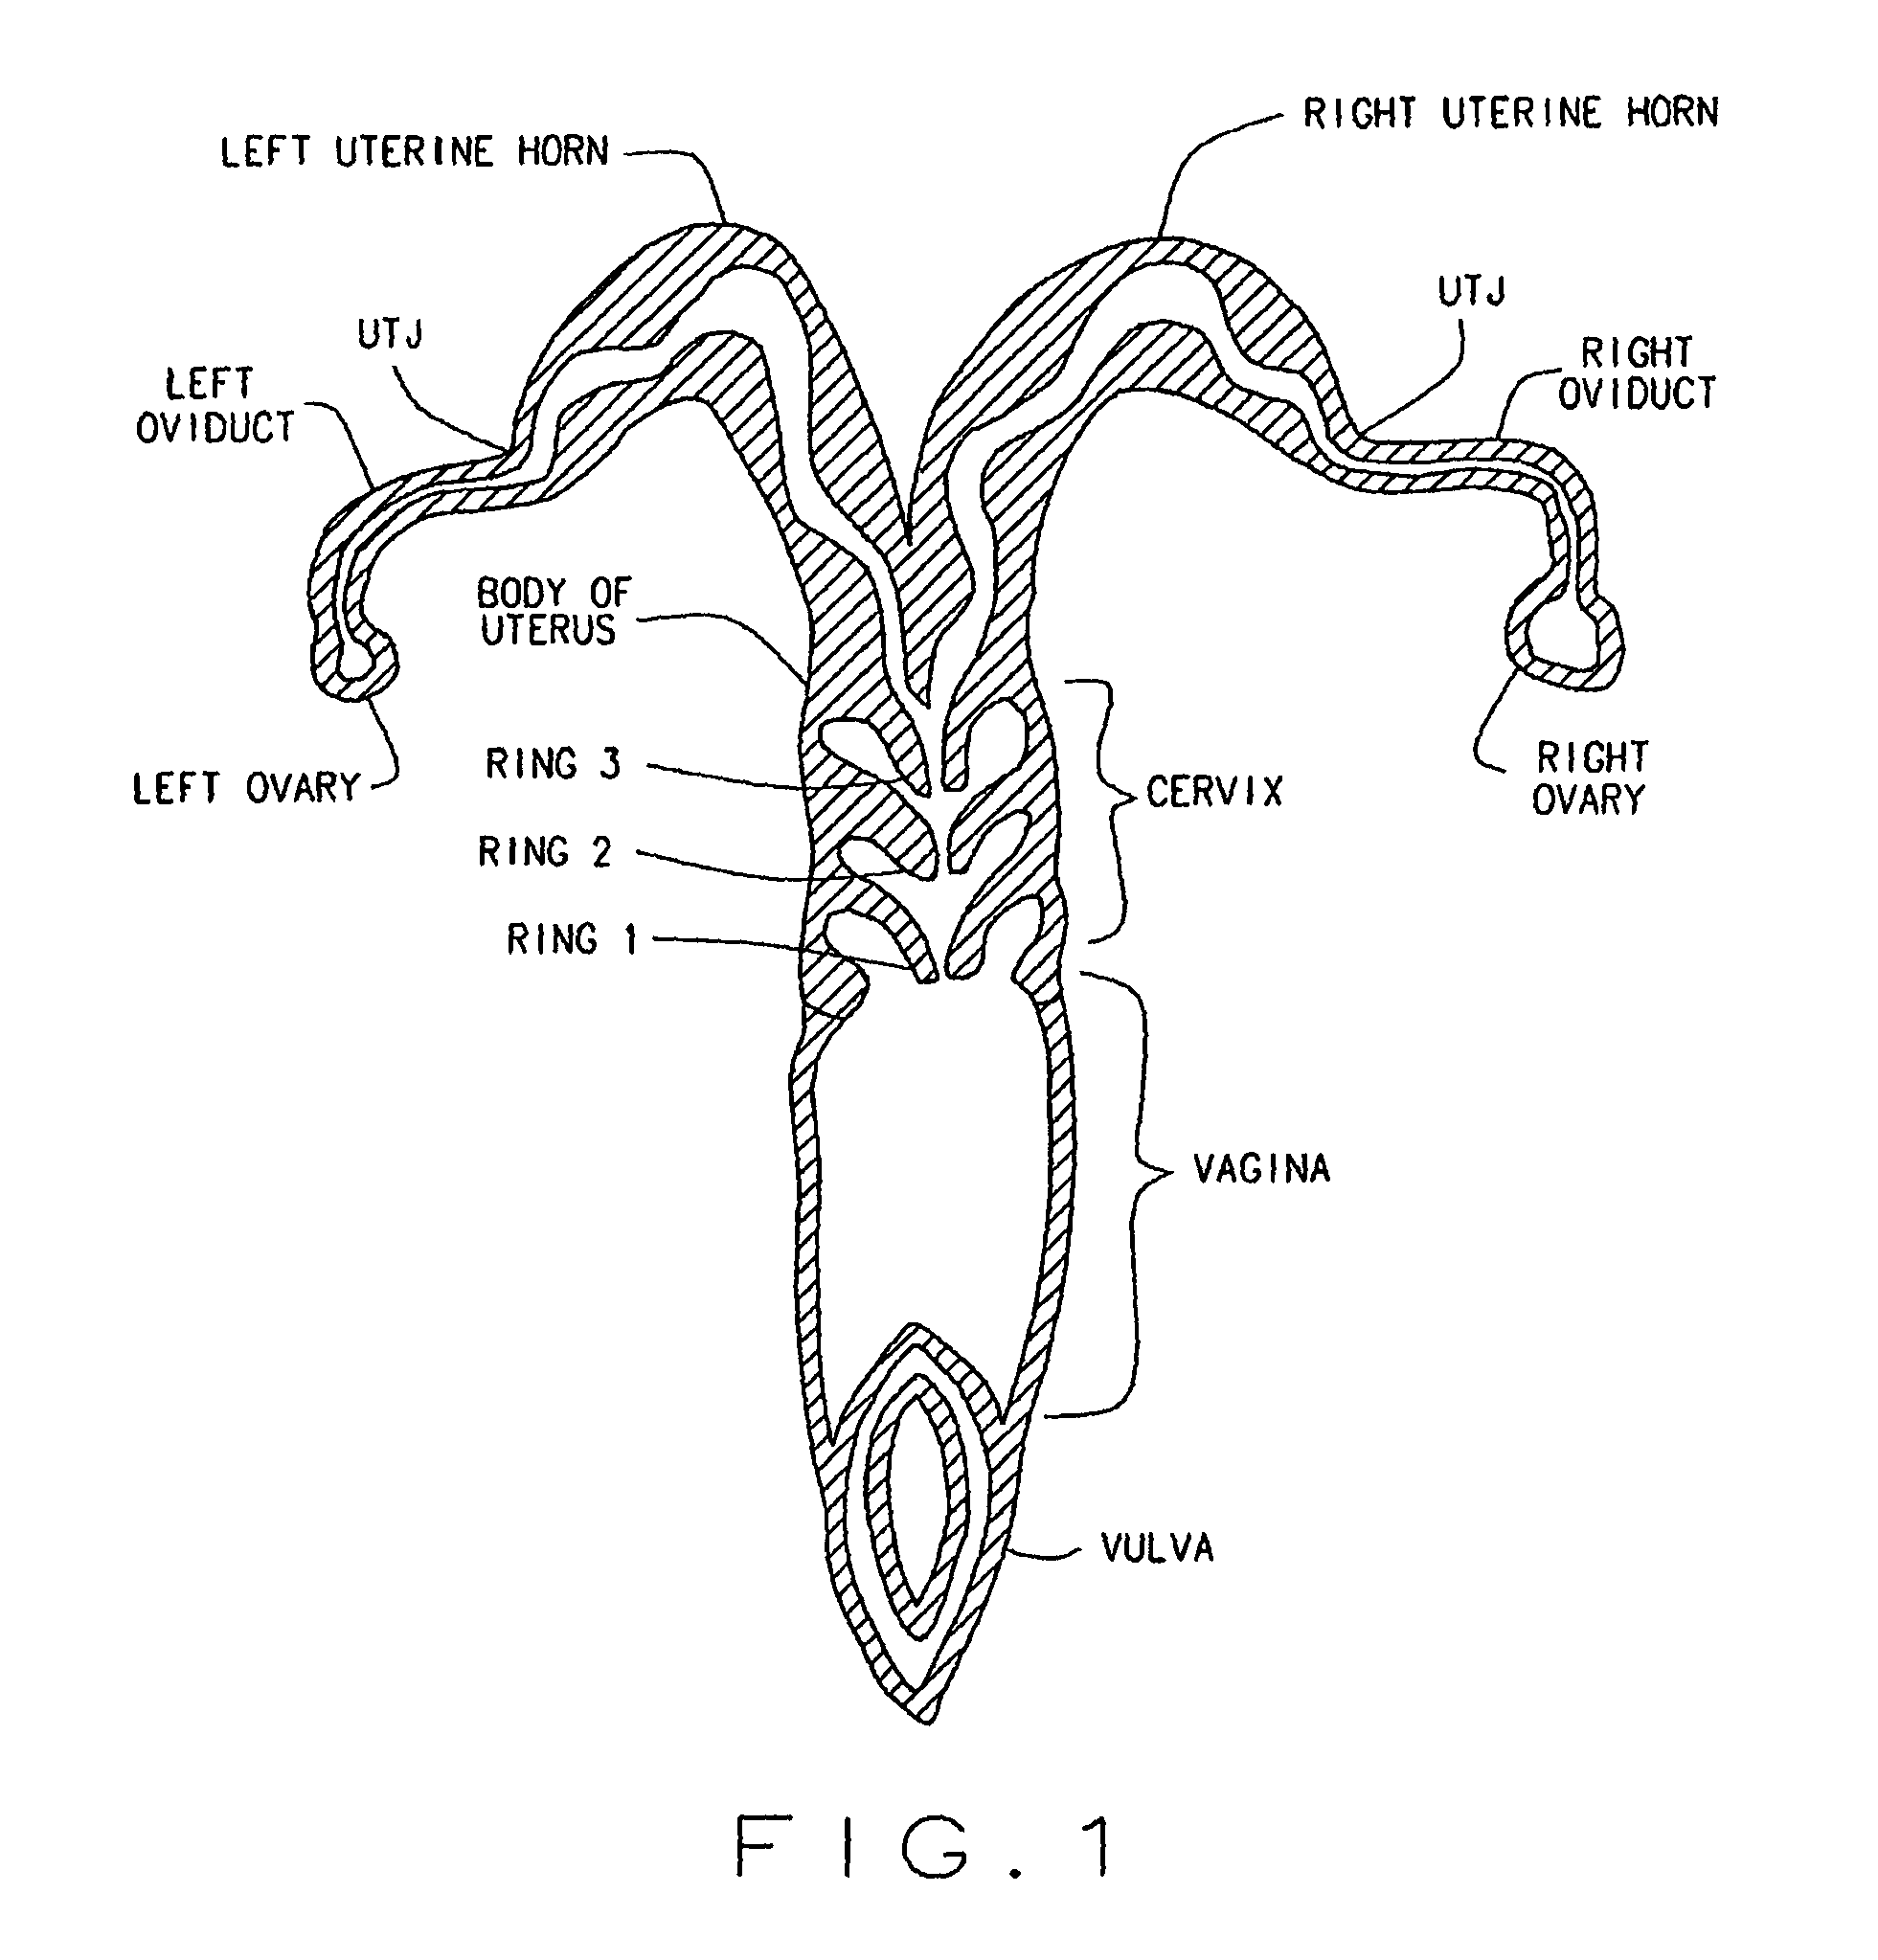 Artificial breeding techniques for bovines including semen diluents and AI apparatus